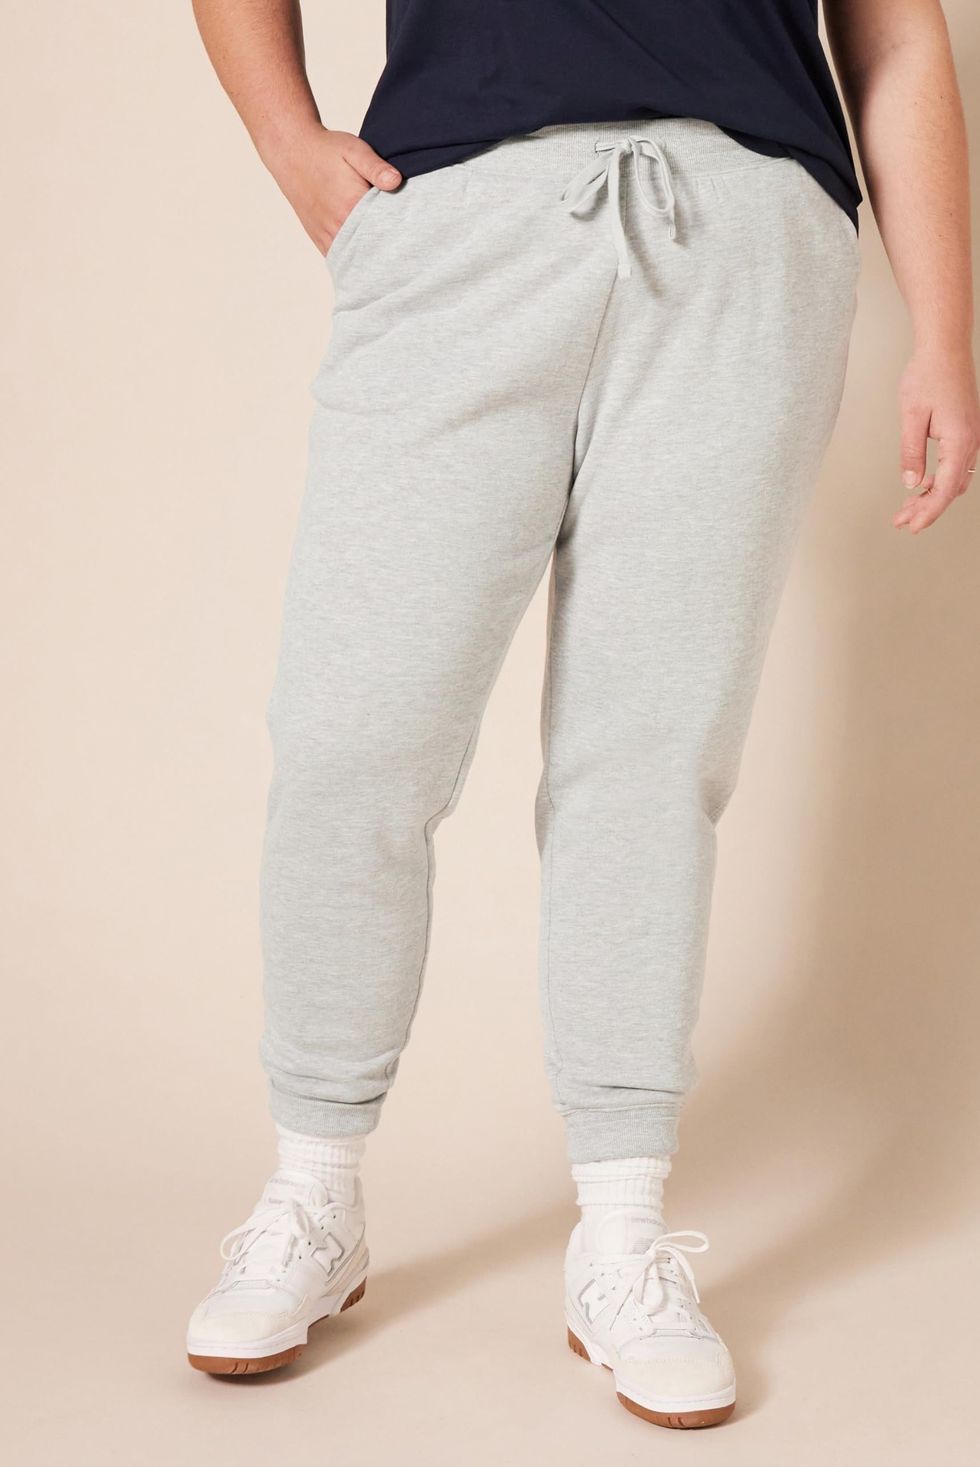 Buy Wassery Womens Wide Leg Yoga Pants with Pockets, High Waist Adjustable  Joggers Loose Lounge Sweatpants, Light Gray, Small at